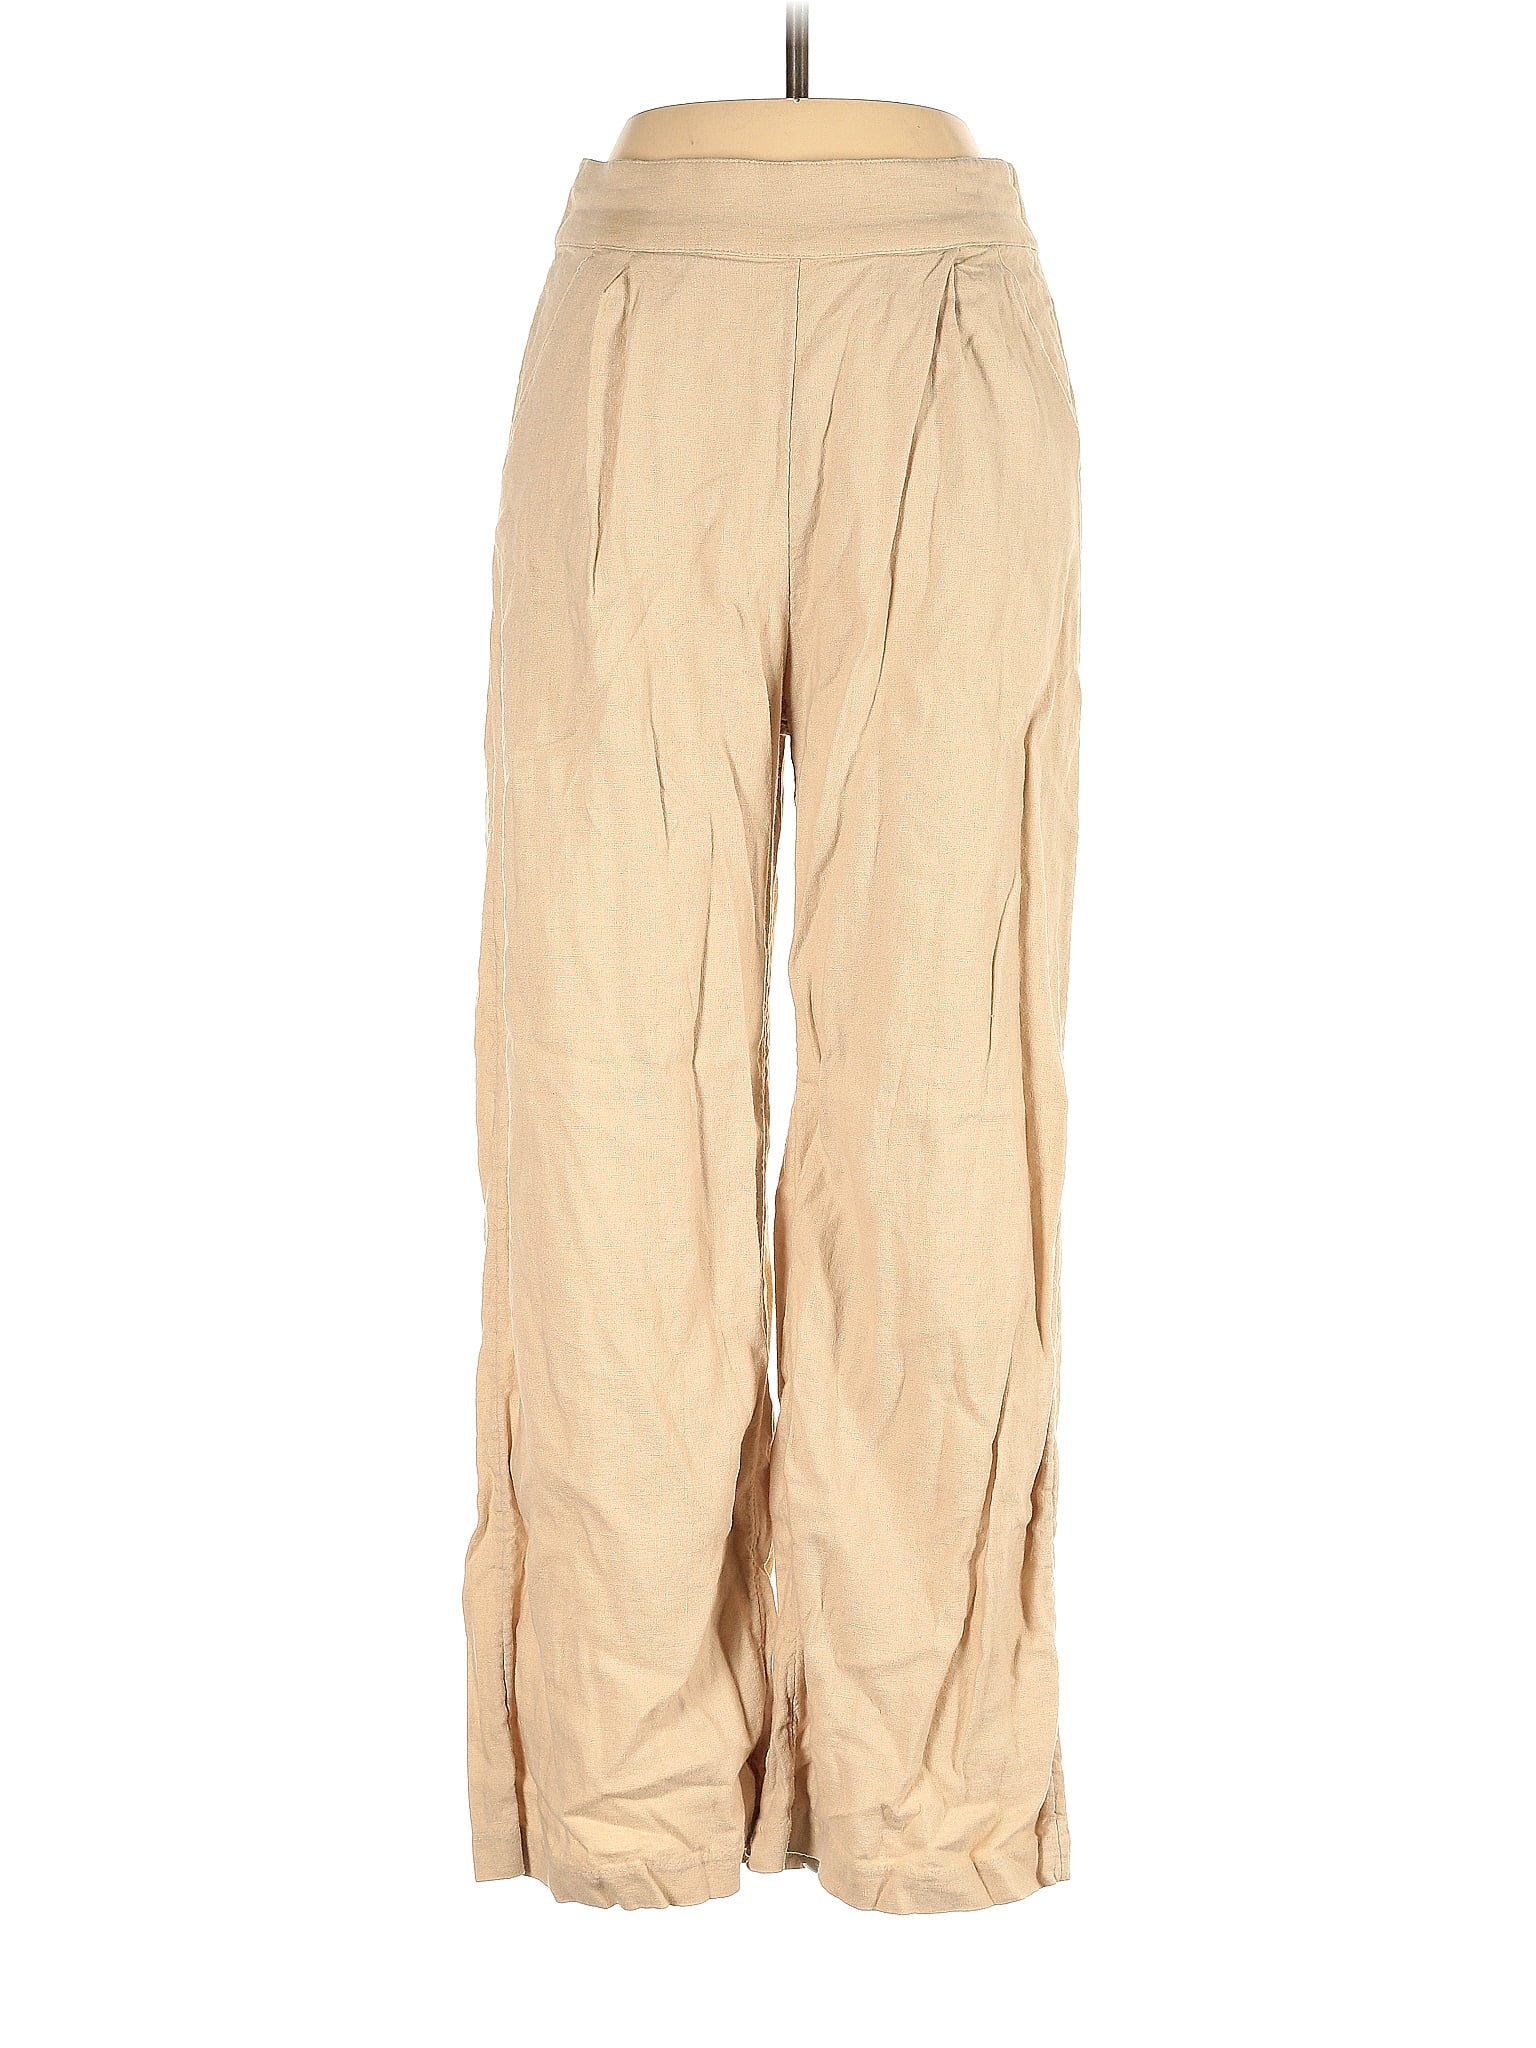 Abercrombie & Fitch Solid Tan Khakis Size XS - 66% off | ThredUp